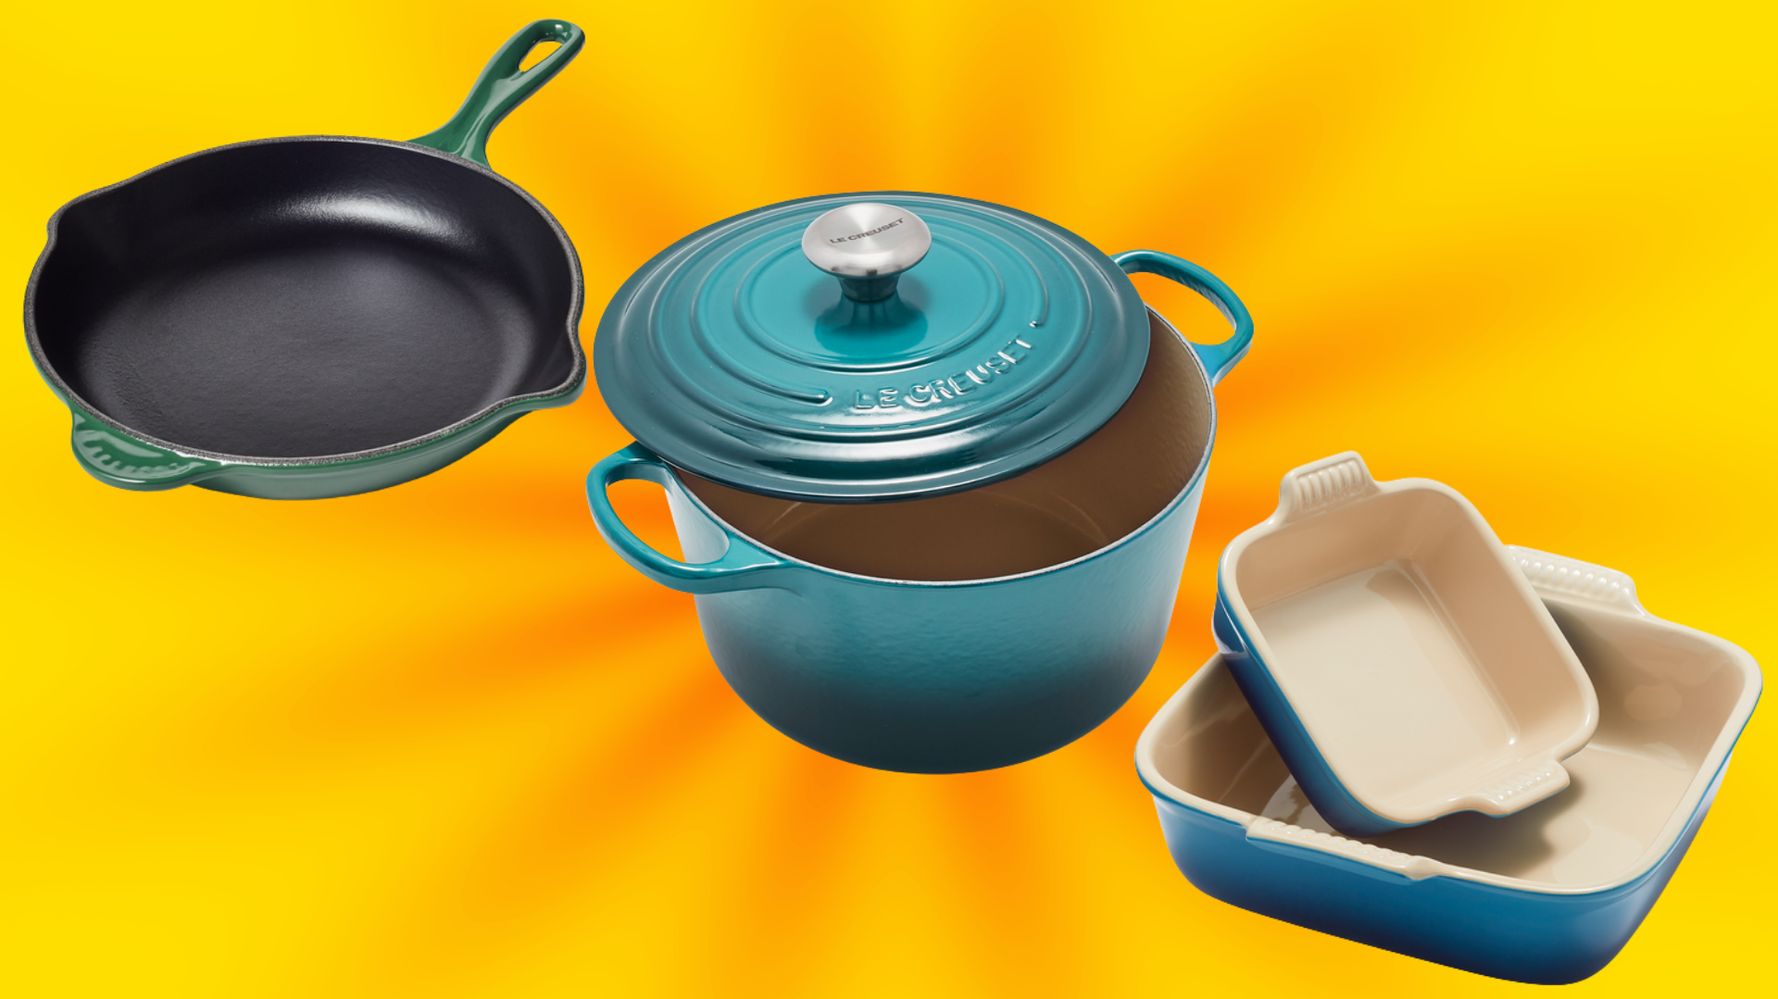 Nordstrom is having a major Le Creuset cookware sale right now